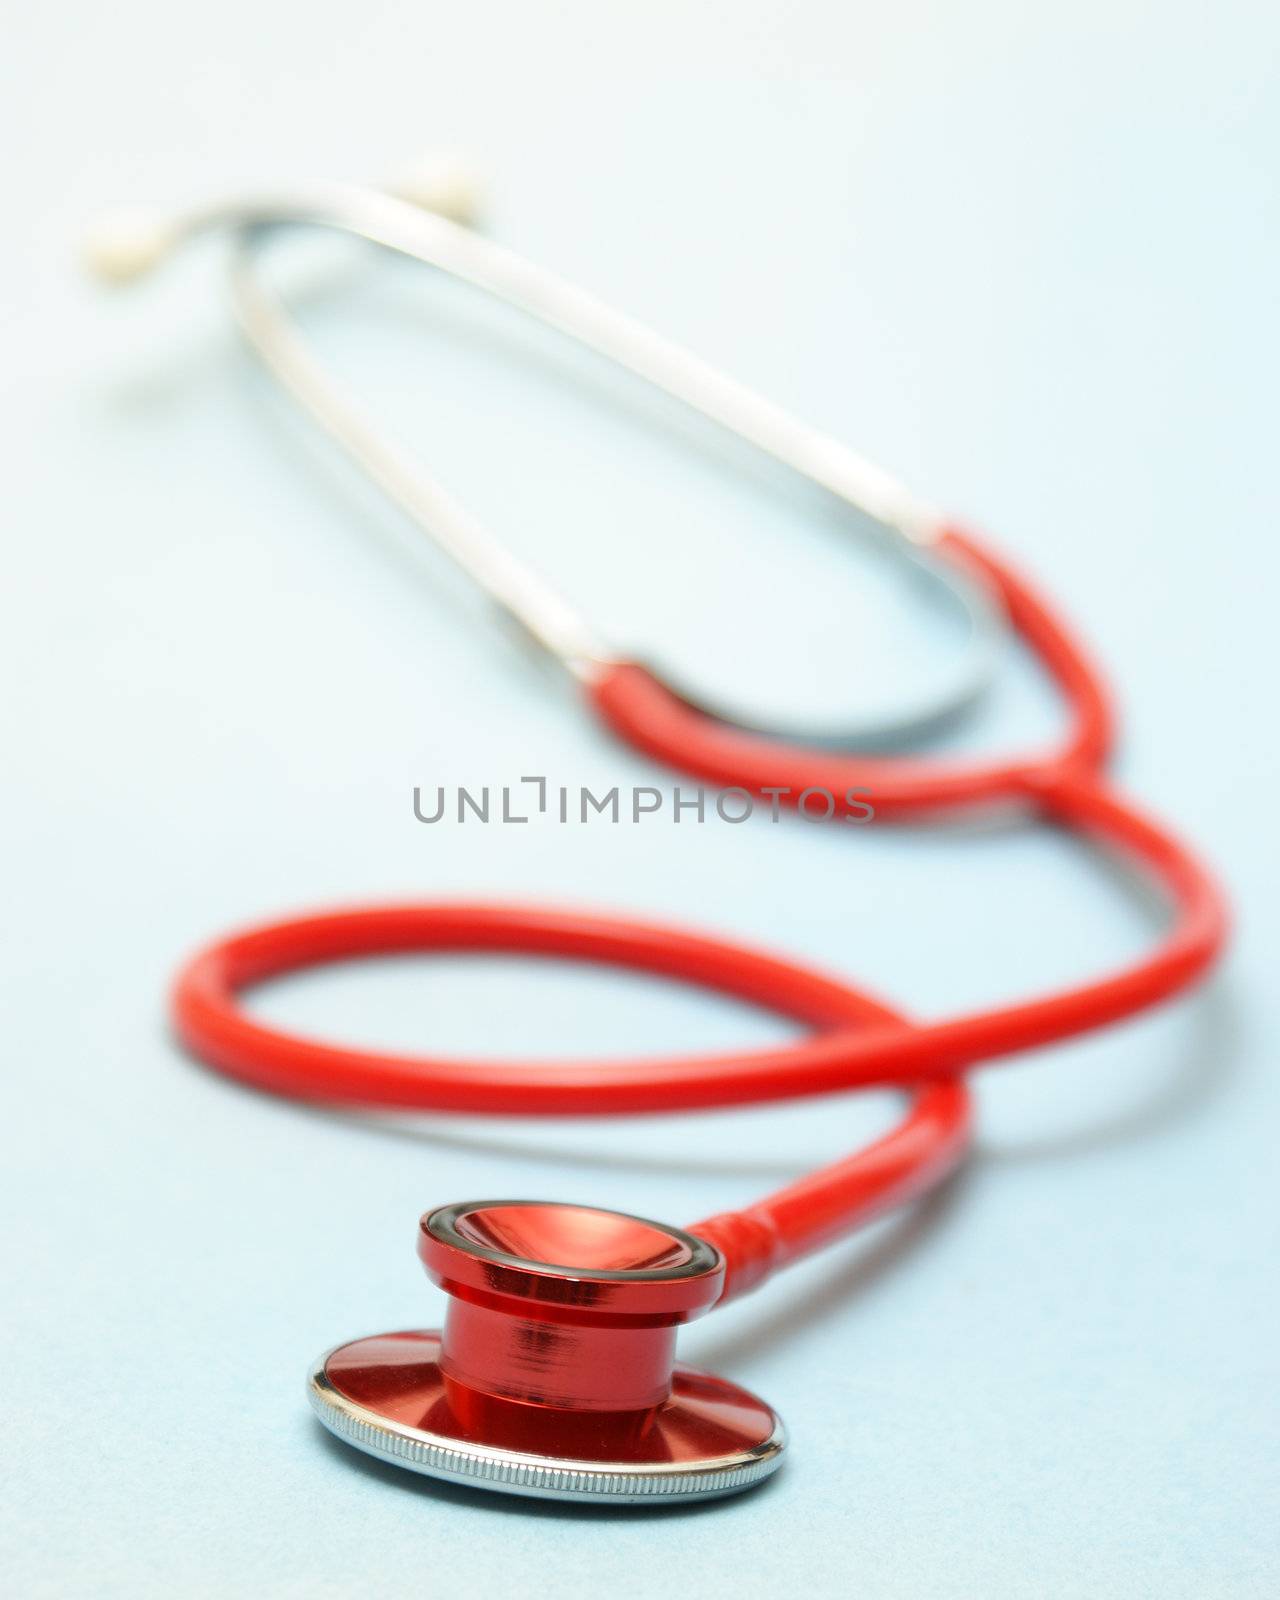 A medical stethoscope for testing pulse and heartbeats.